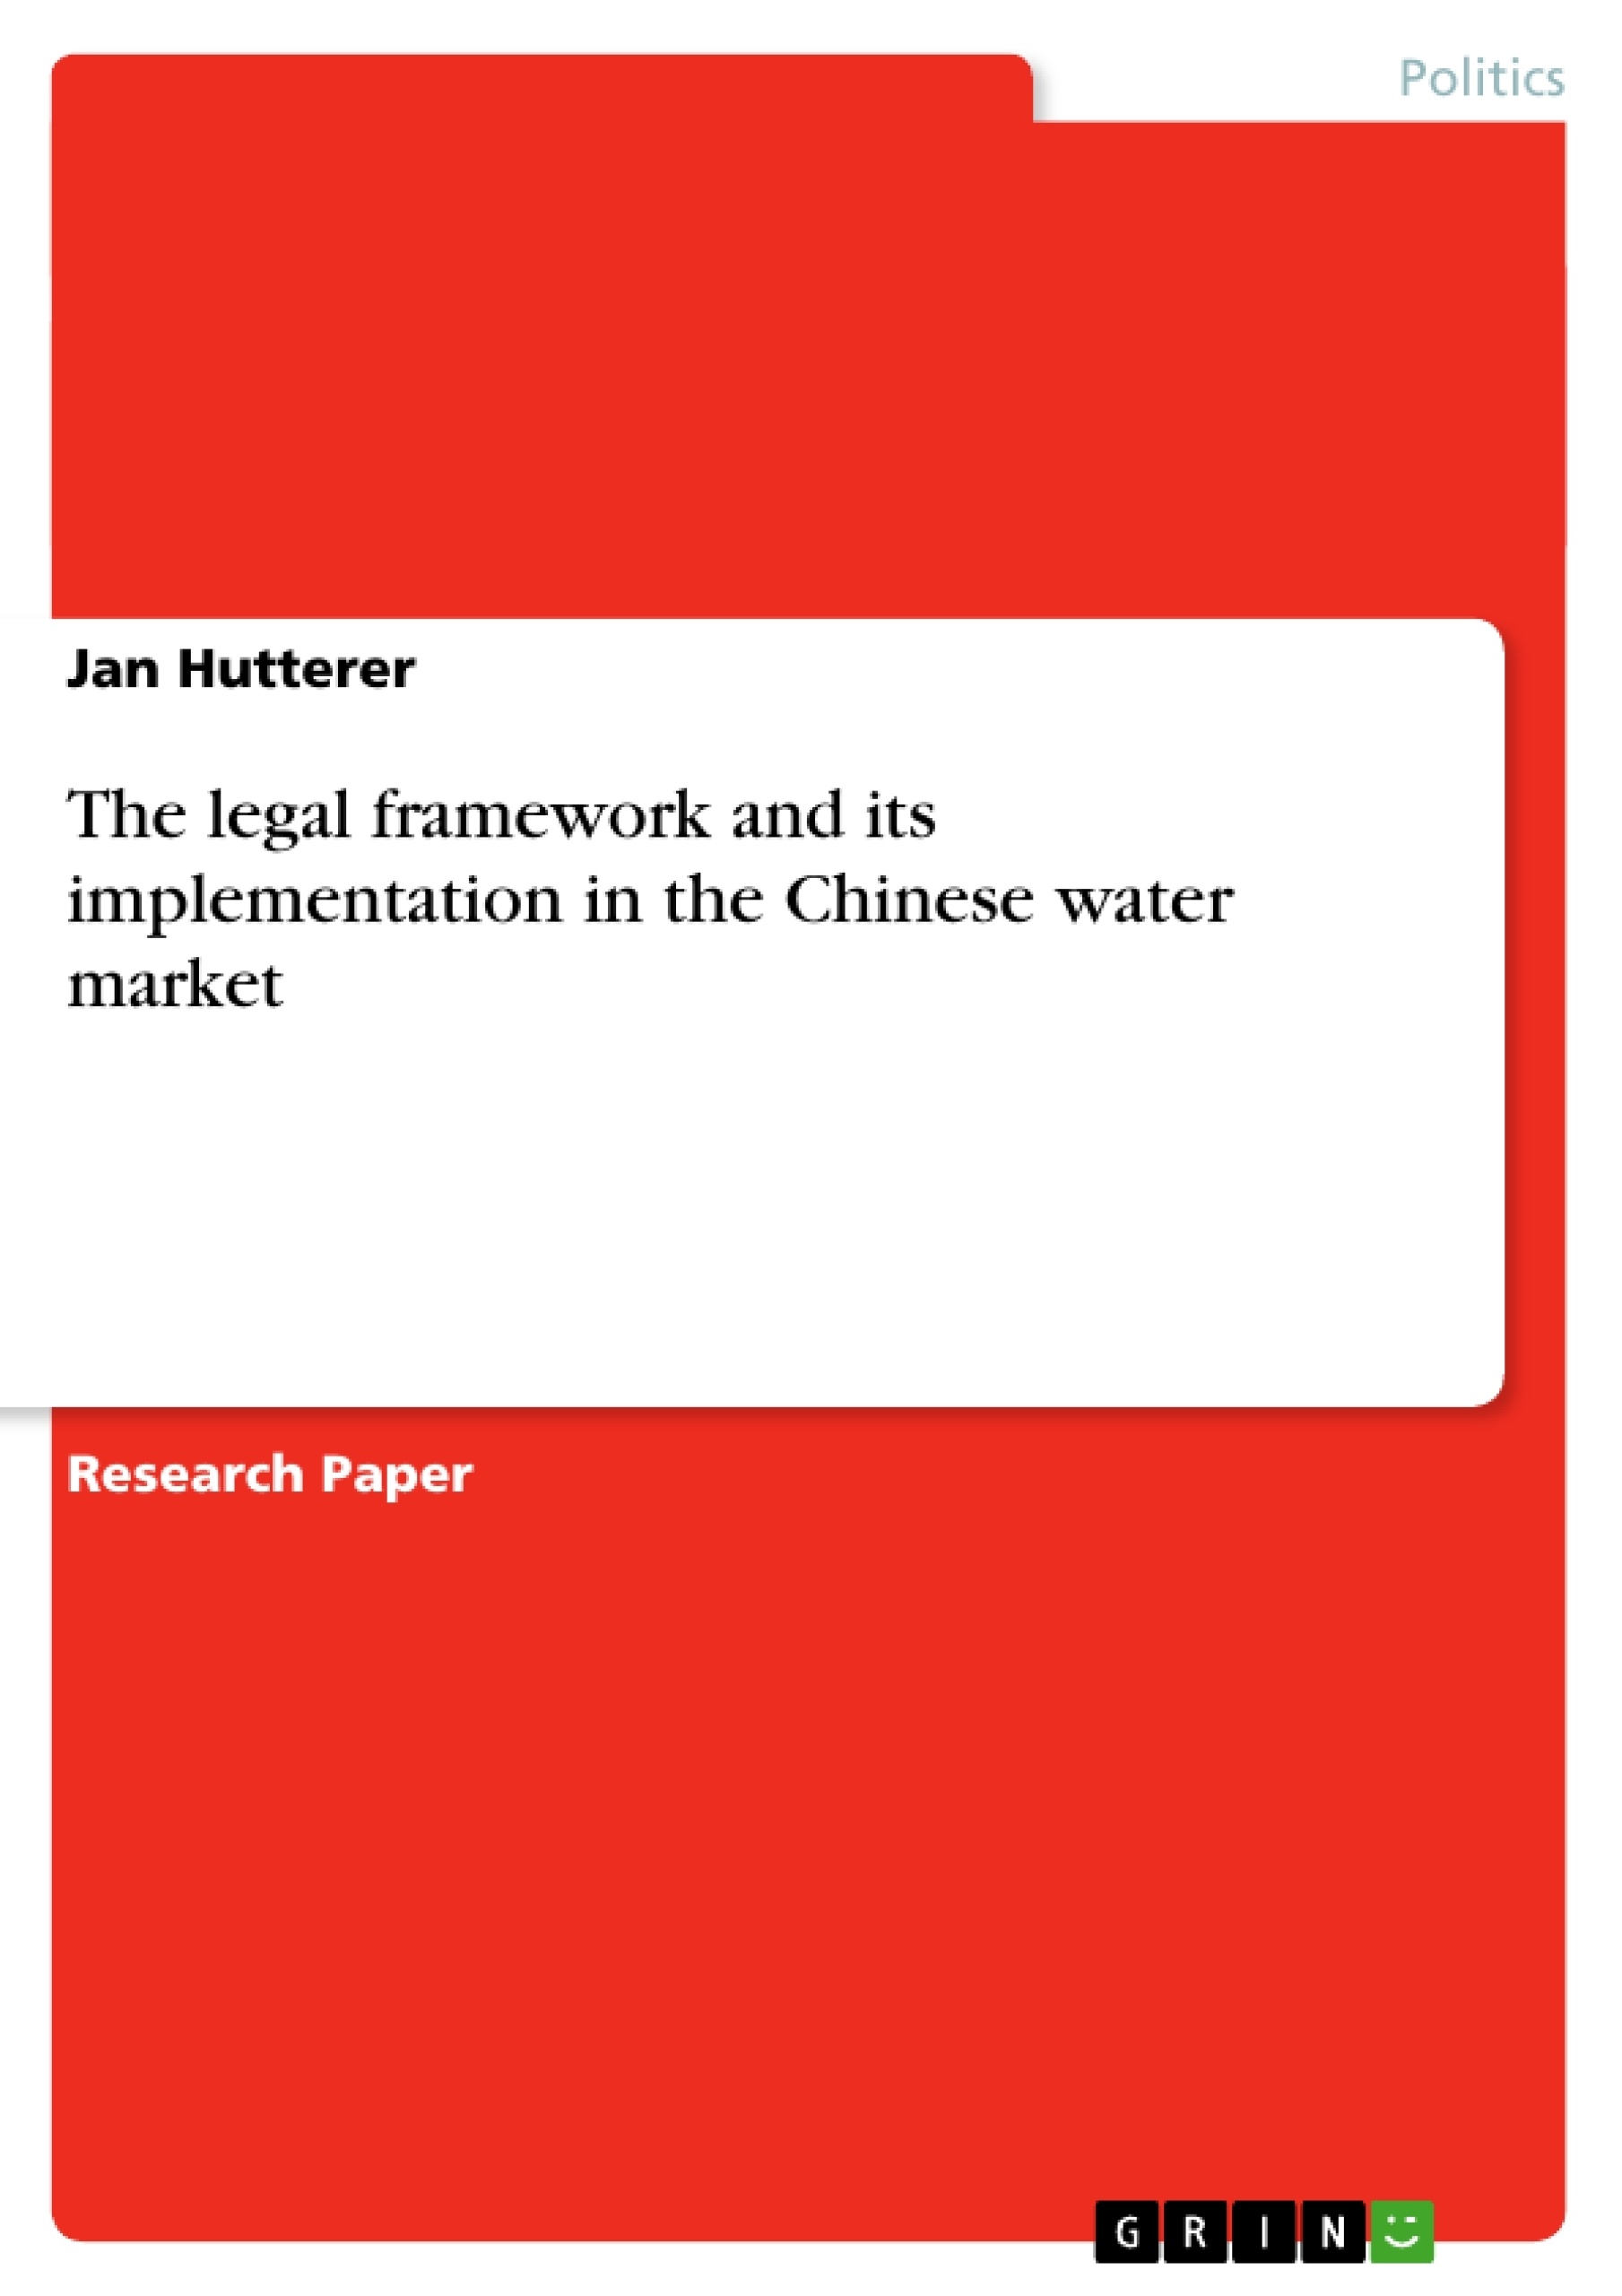 Título: The legal framework and its implementation in the Chinese water market